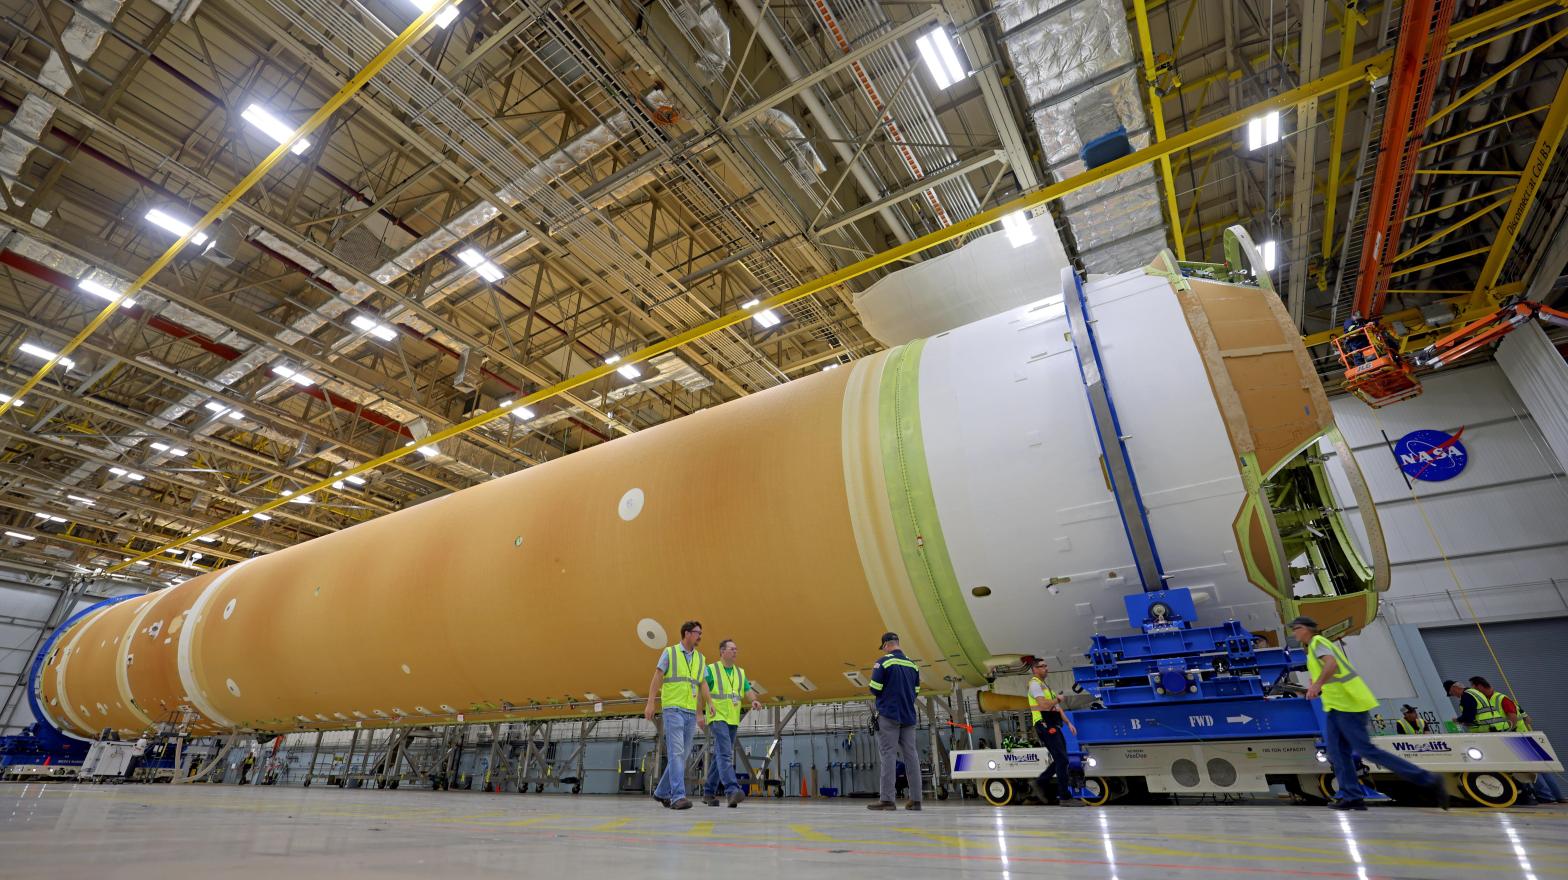 The Space Launch System (SLS) rocket's core stage for Artemis 2 at the Michoud Assembly Facility in New Orleans. (Photo: NASA)